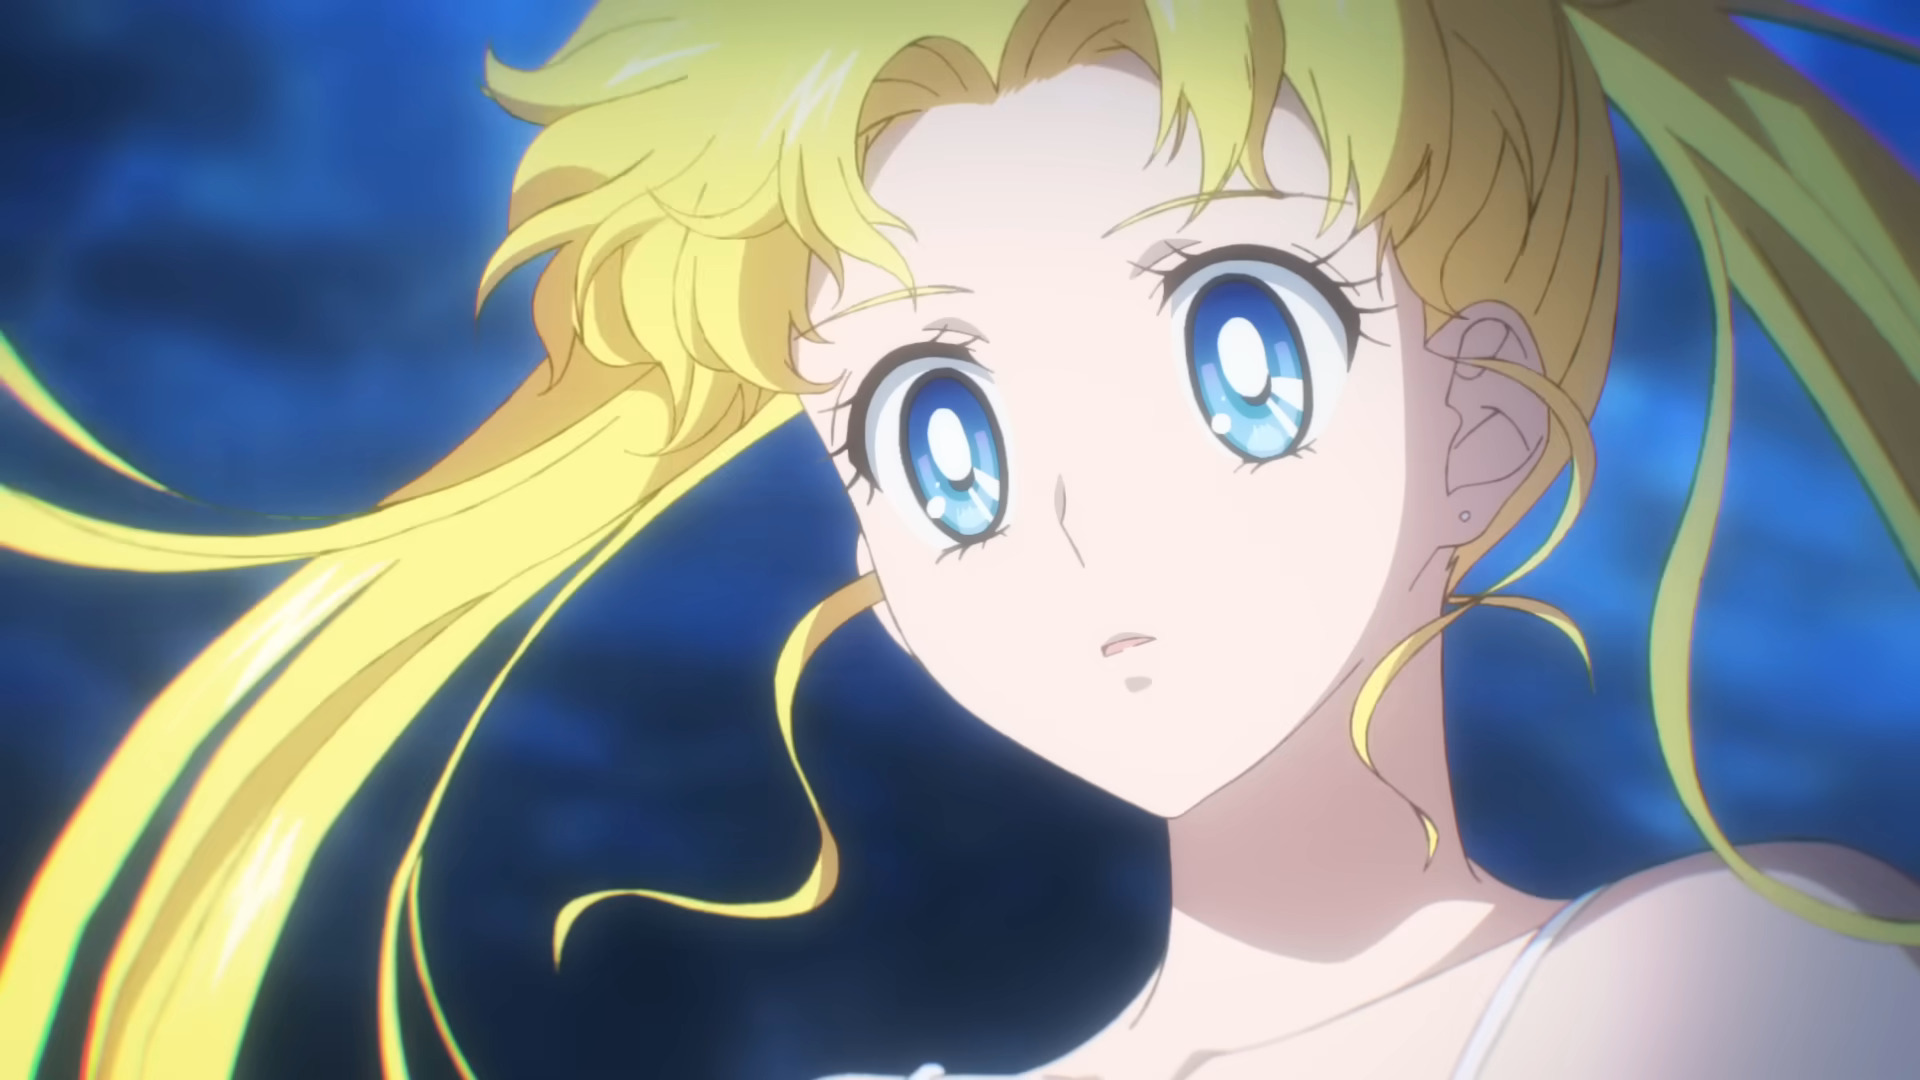 Usagi overflows with new strength in the trailer for Pretty Guardian Sailor Moon Cosmos (2023), Toei Animation